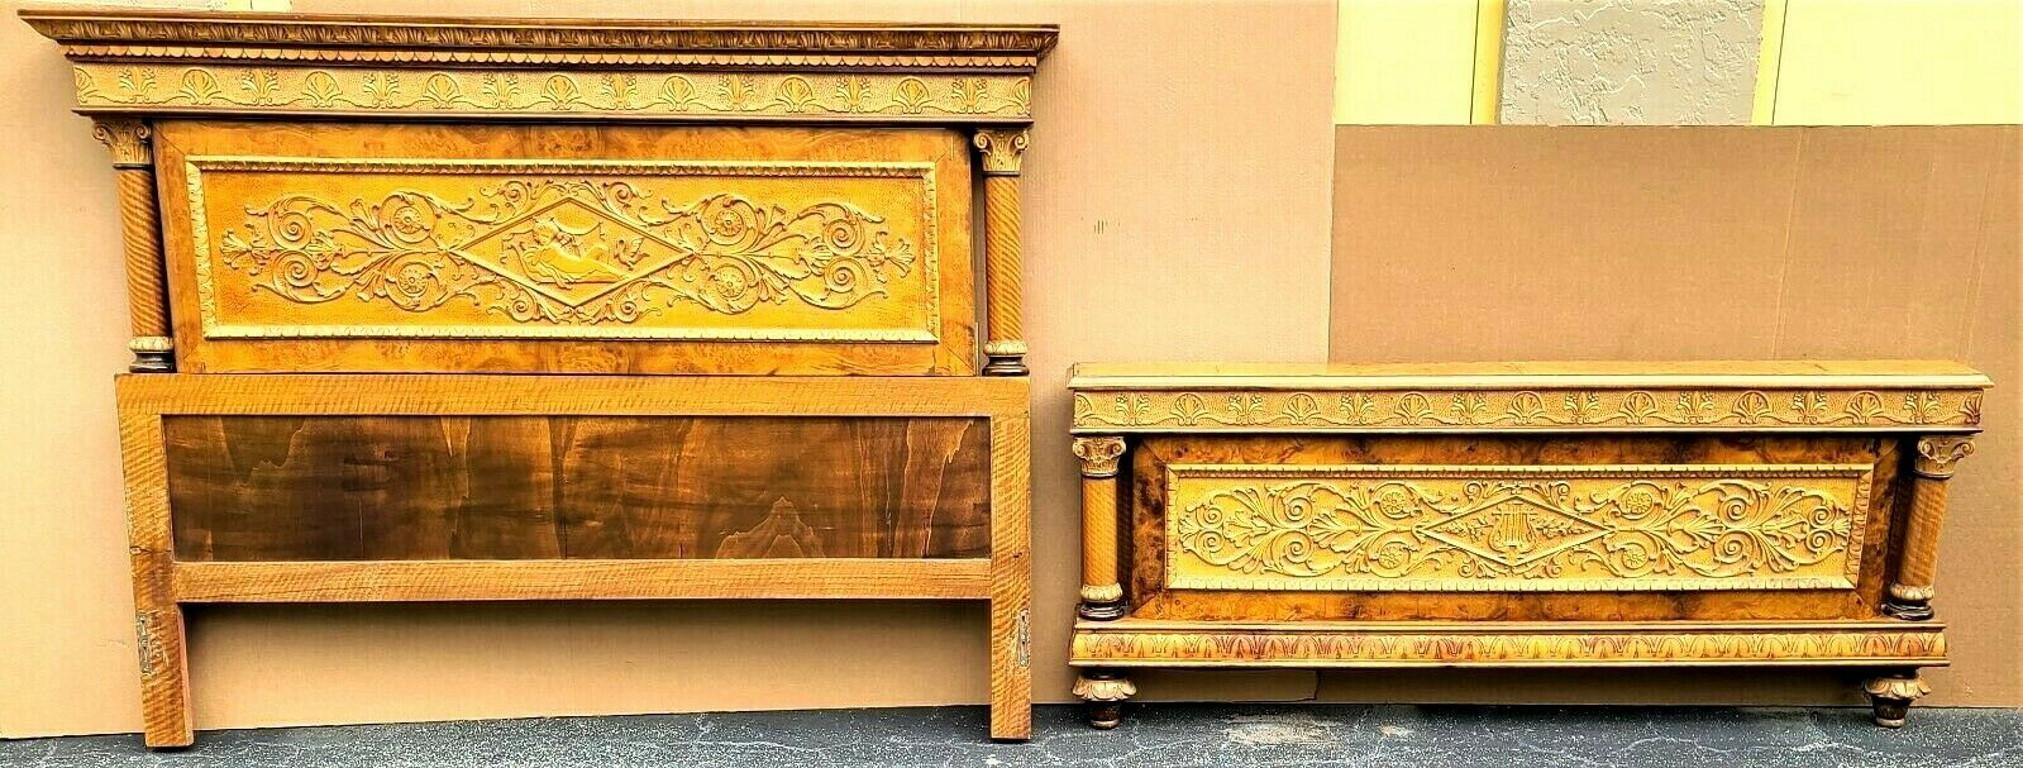 Offering One Of Our Recent Palm Beach Estate Fine Furniture Acquisitions Of A
Antique c 1900 Italian Neoclassical Hand Carved Burl Bed Frame
This is a very special and unique piece. All hand-carved.
Can be used as a king or queen-size bed depending